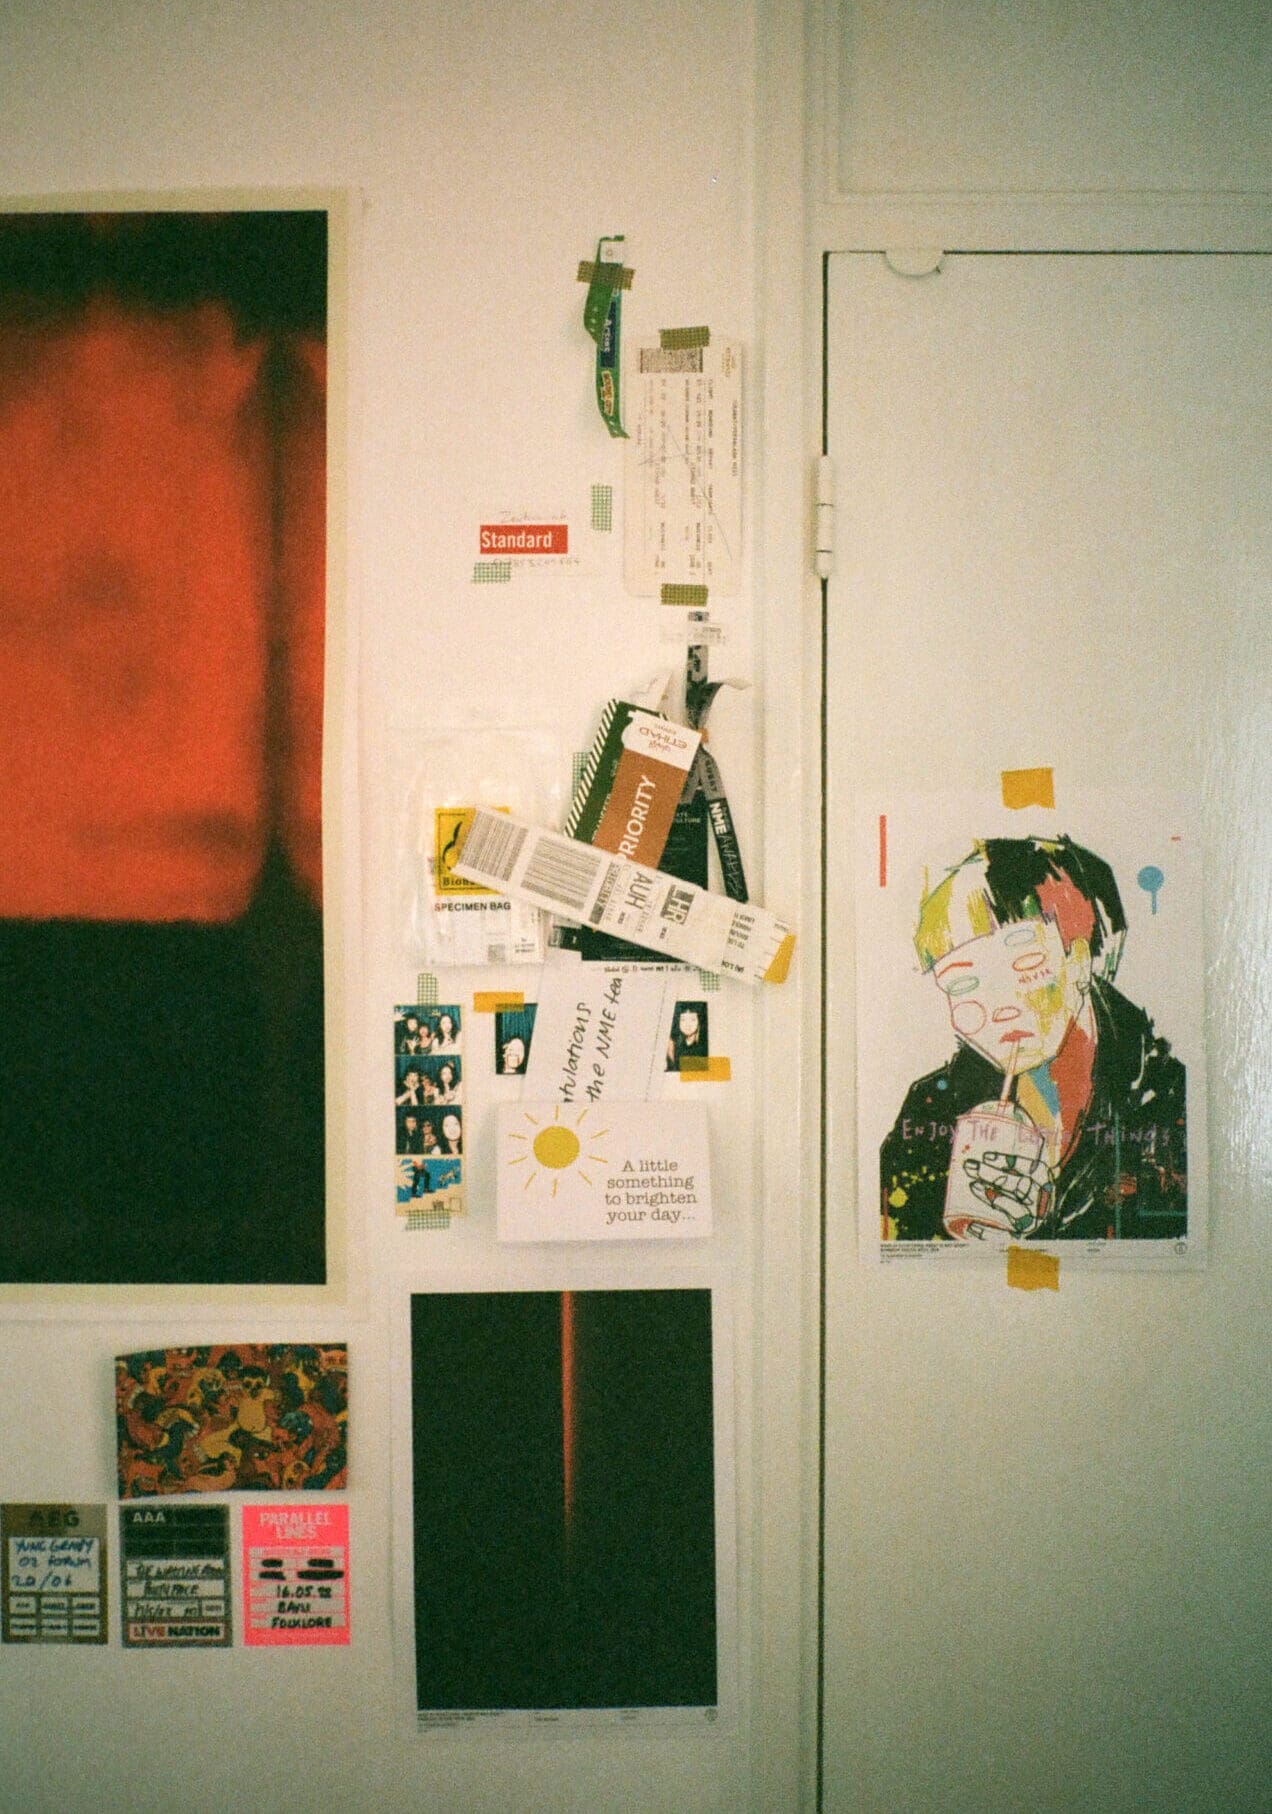 An interview with Thai pop singer Pyra | A wall in Pyra's apartment with photos, tickets, and posters tacked to the white wall.